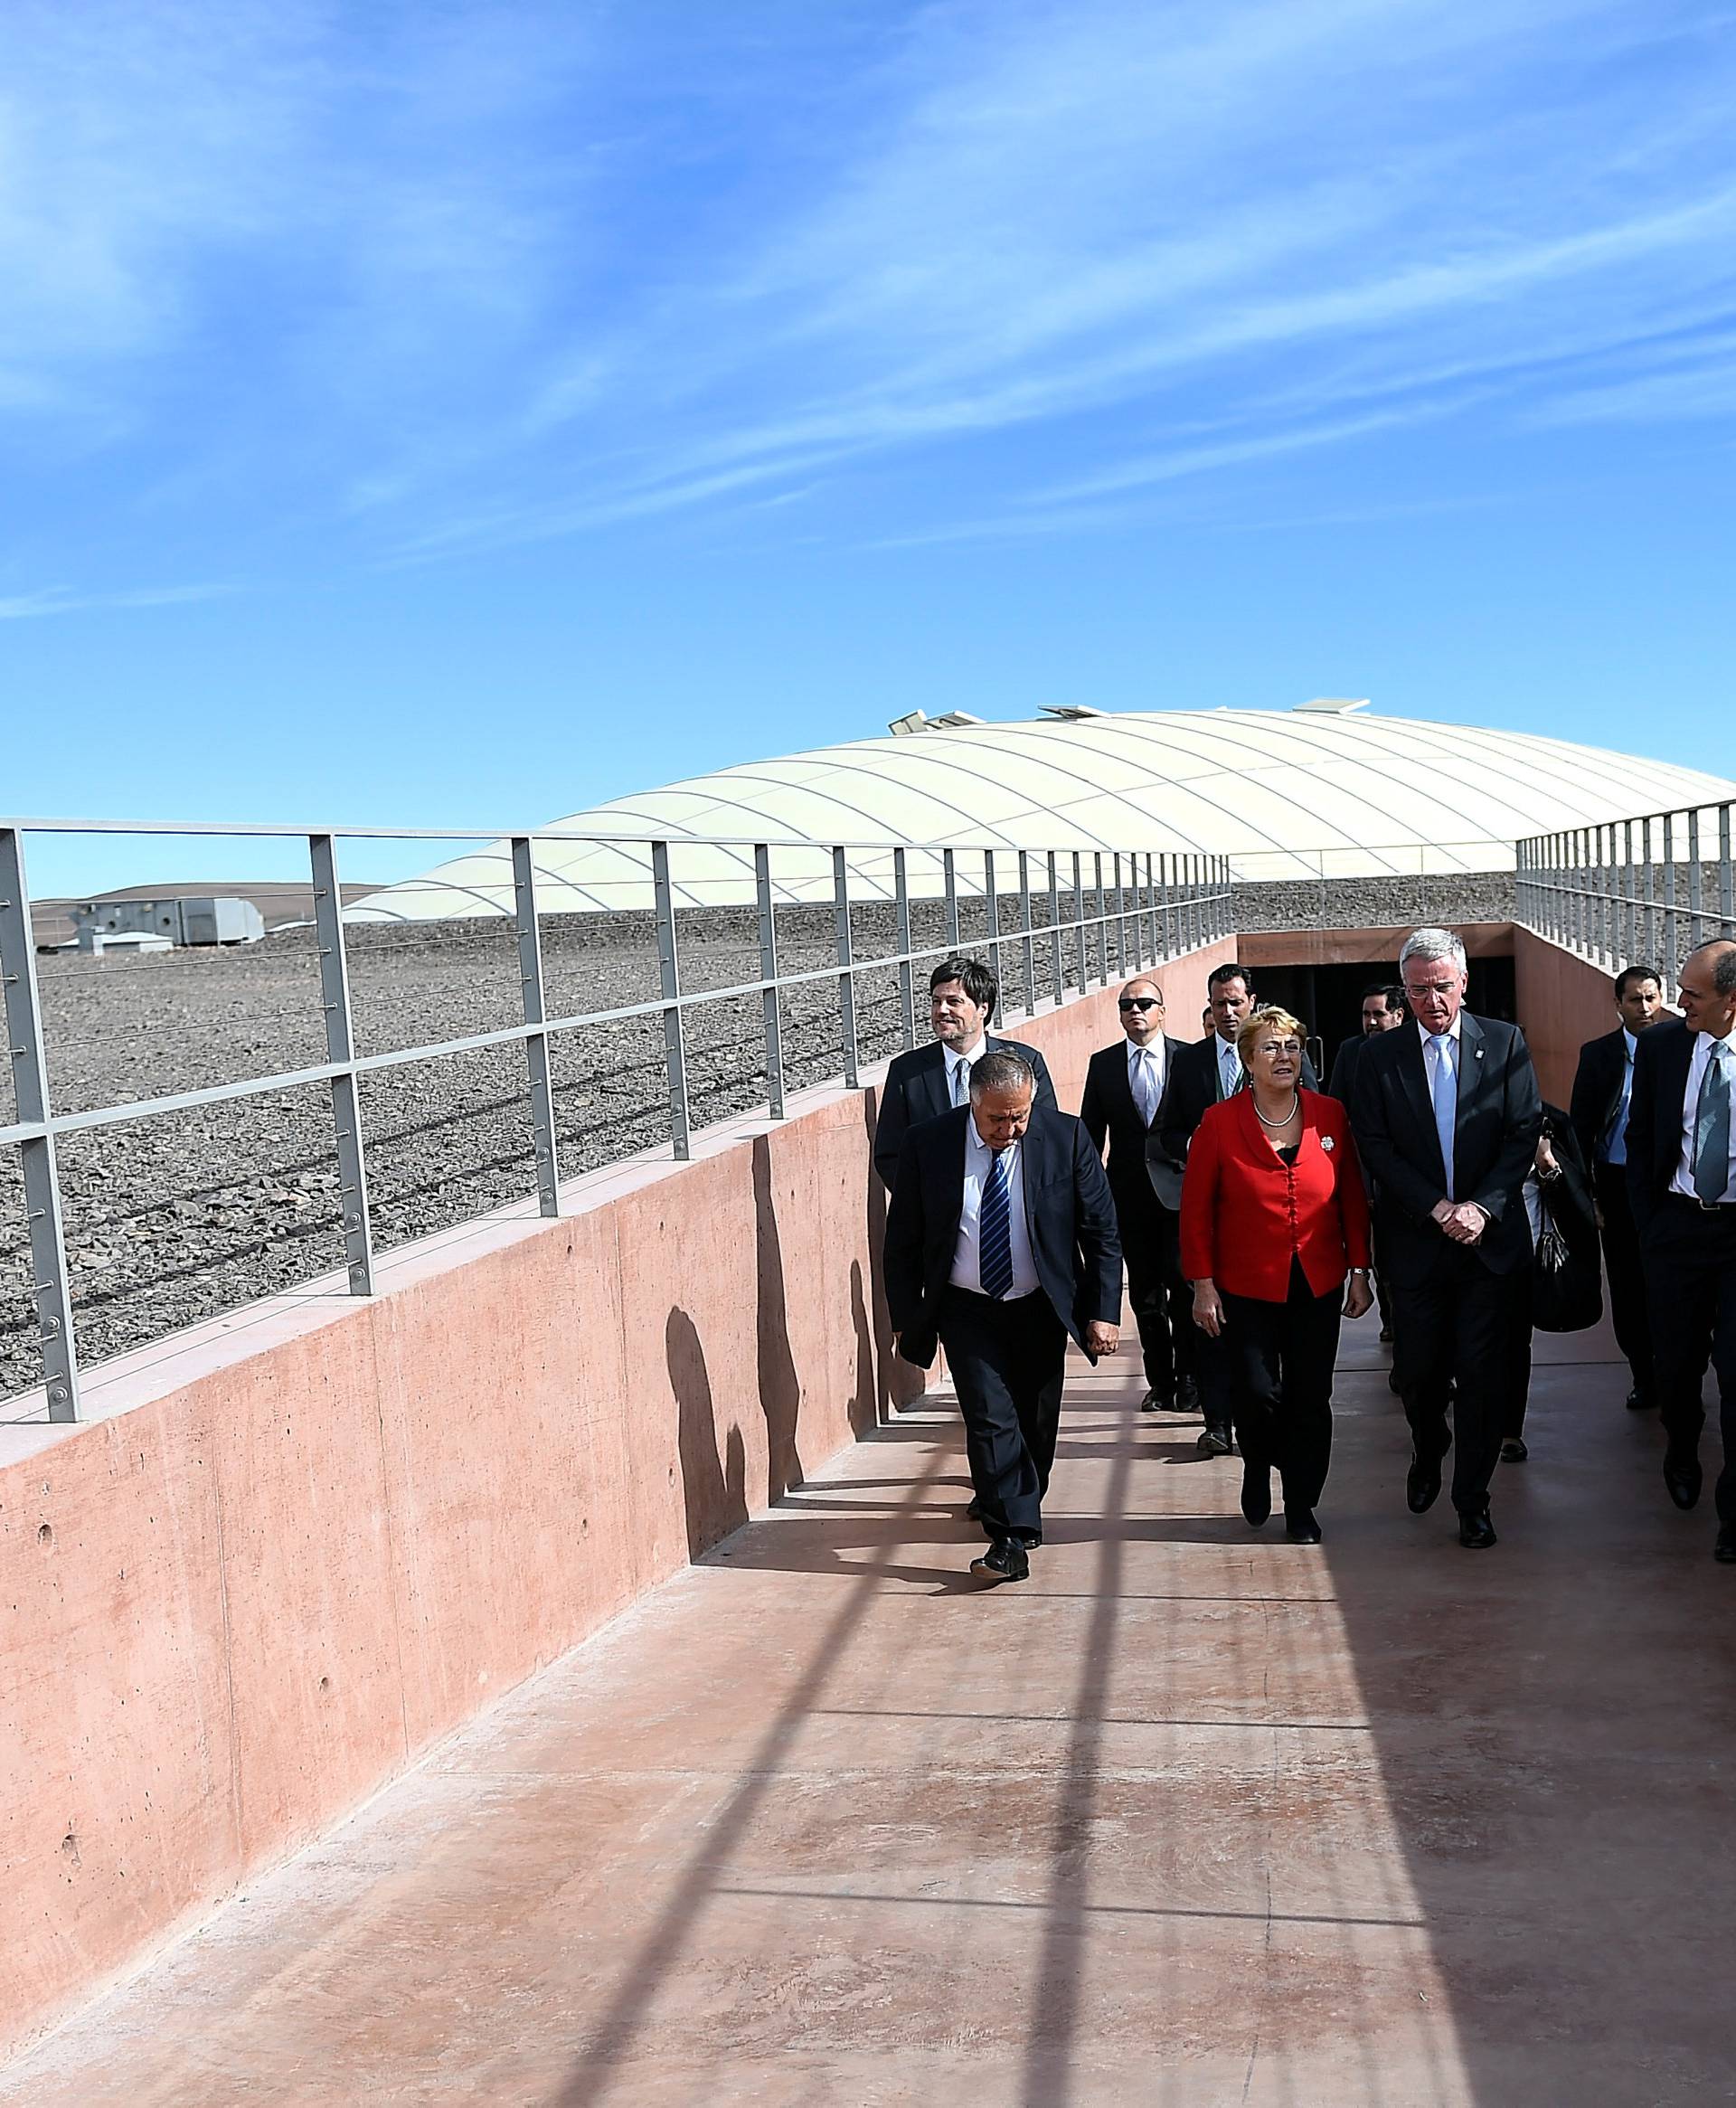 Chile's President Bachelet and Director General of the European Southern Observatory (ESO) De Zeeuw walk at the construction site of the world's largest telescope in Atacama